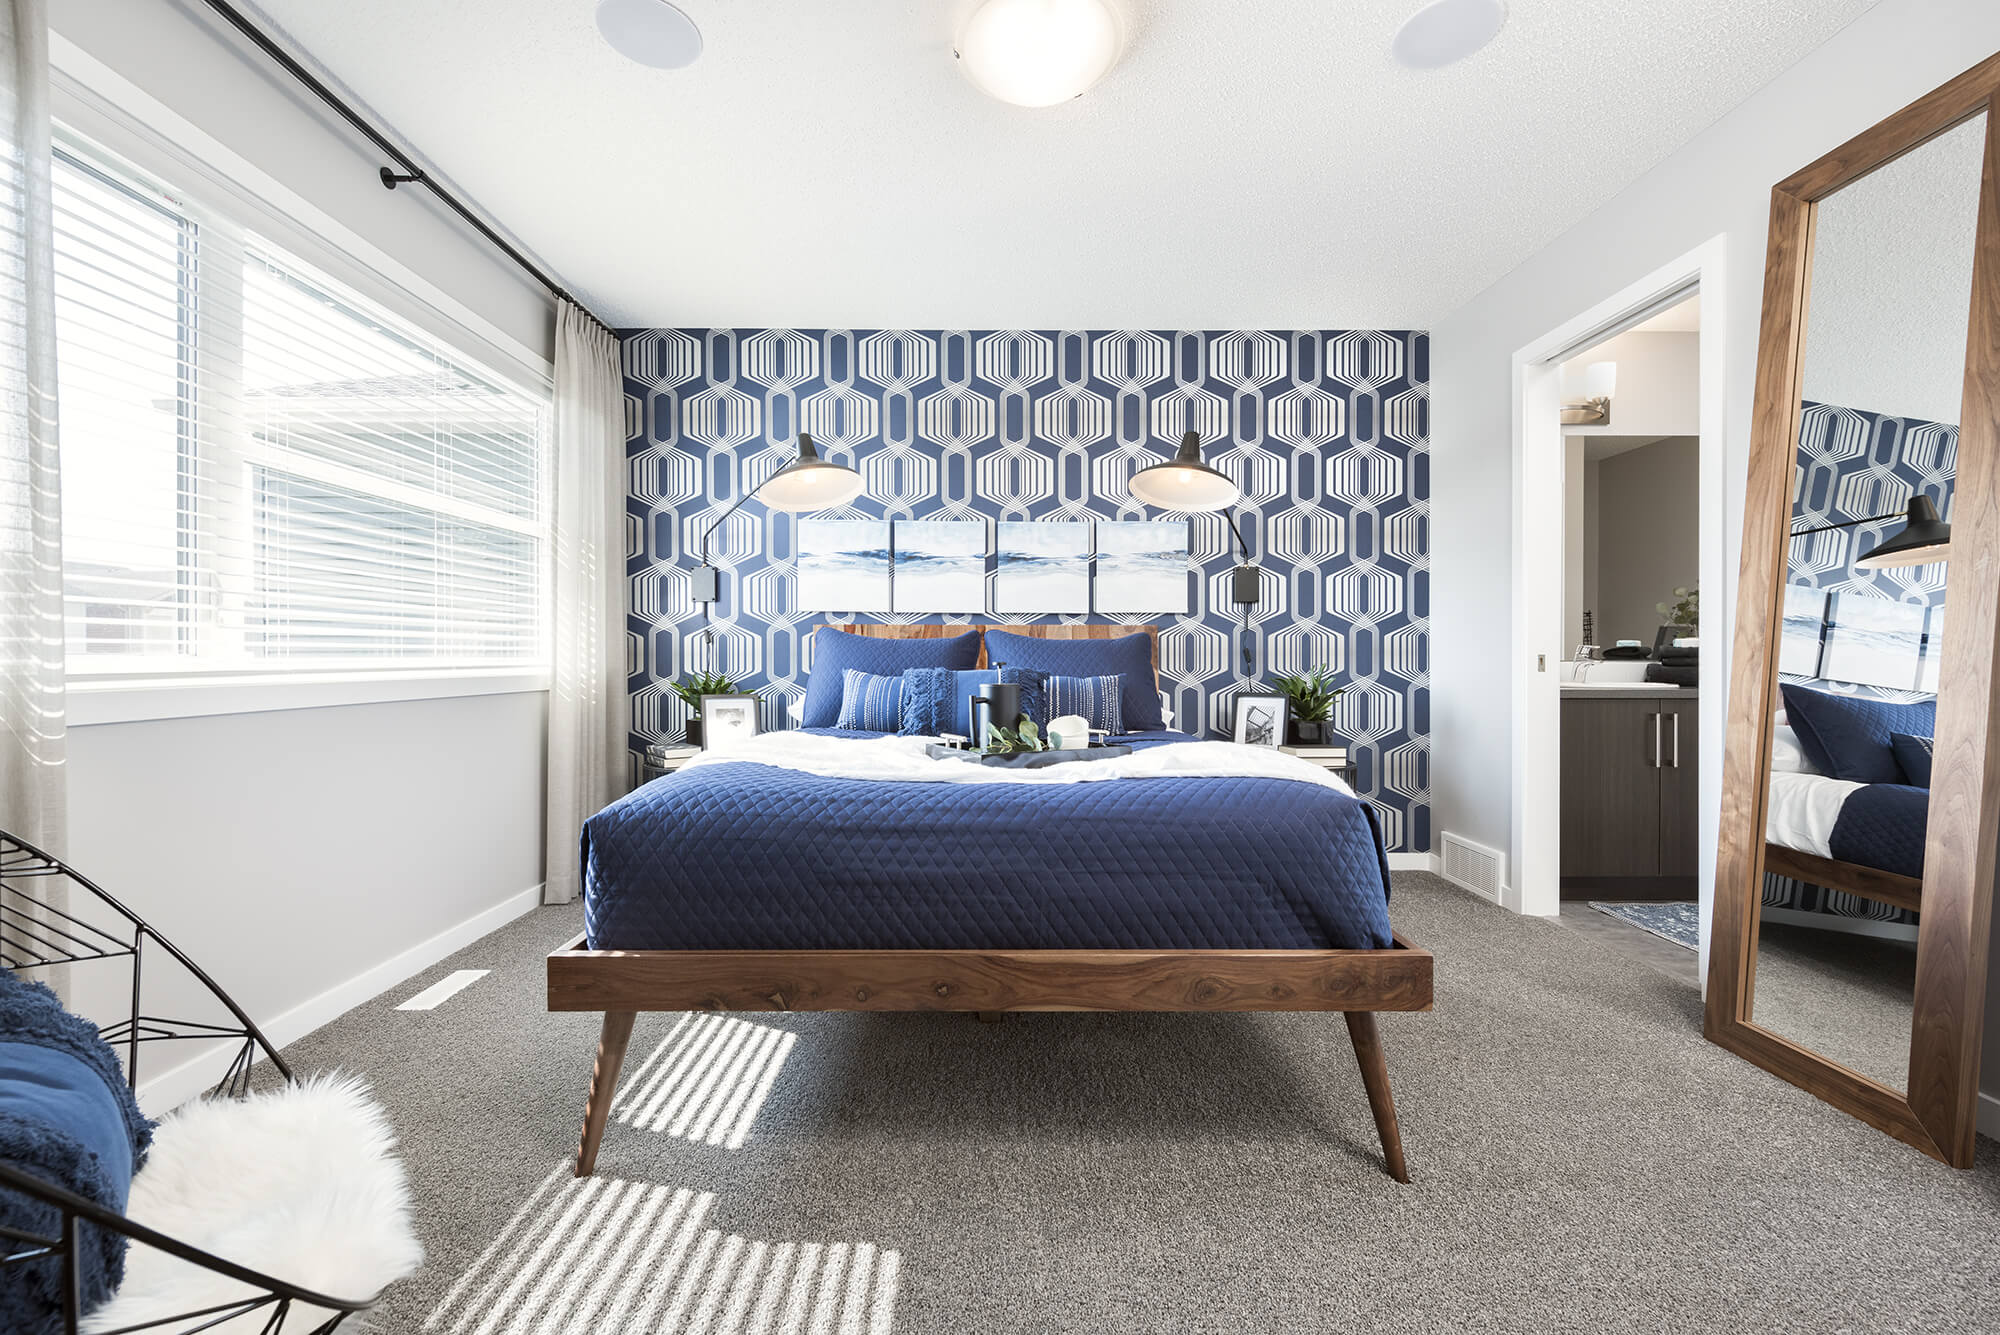 A furnished bedroom with a blue patterned statement wall.